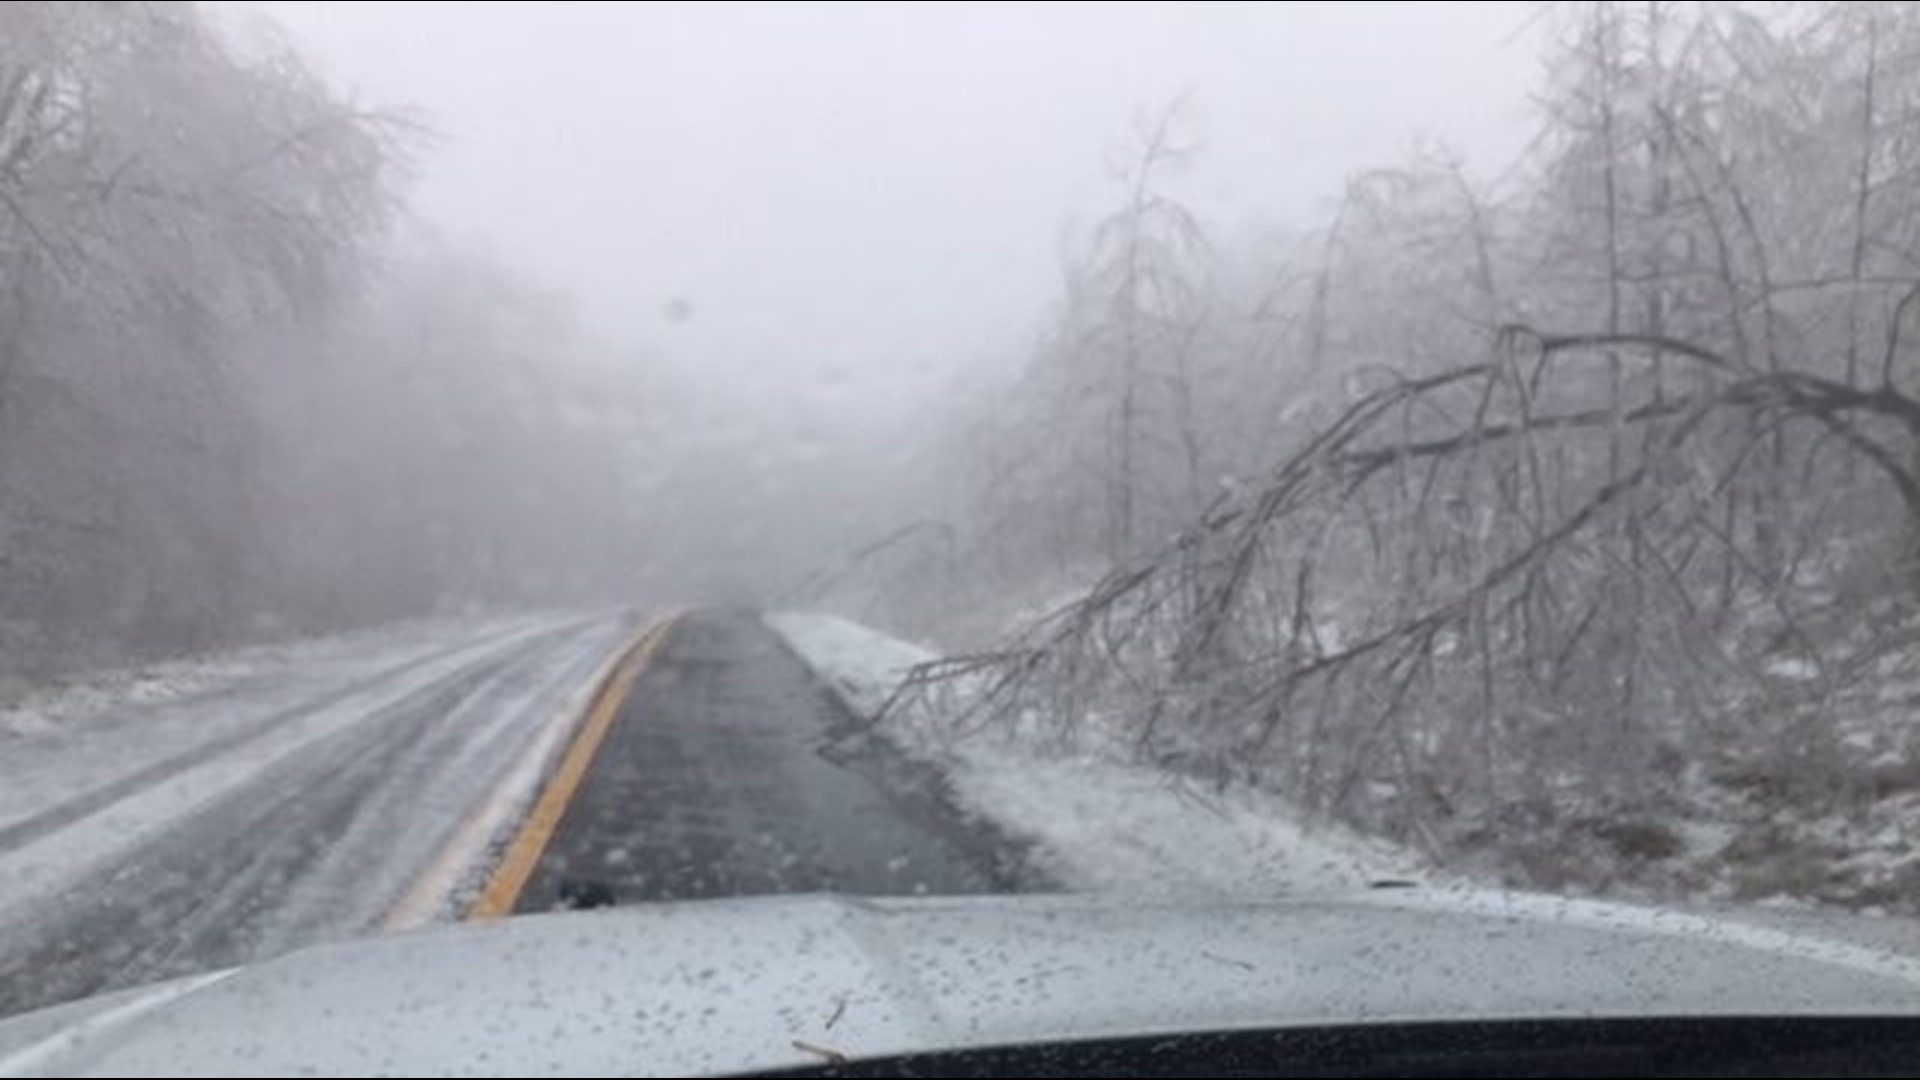 After snow and ice covered much of northeast Georgia, crews worked to clear fallen trees and treat icy roads.